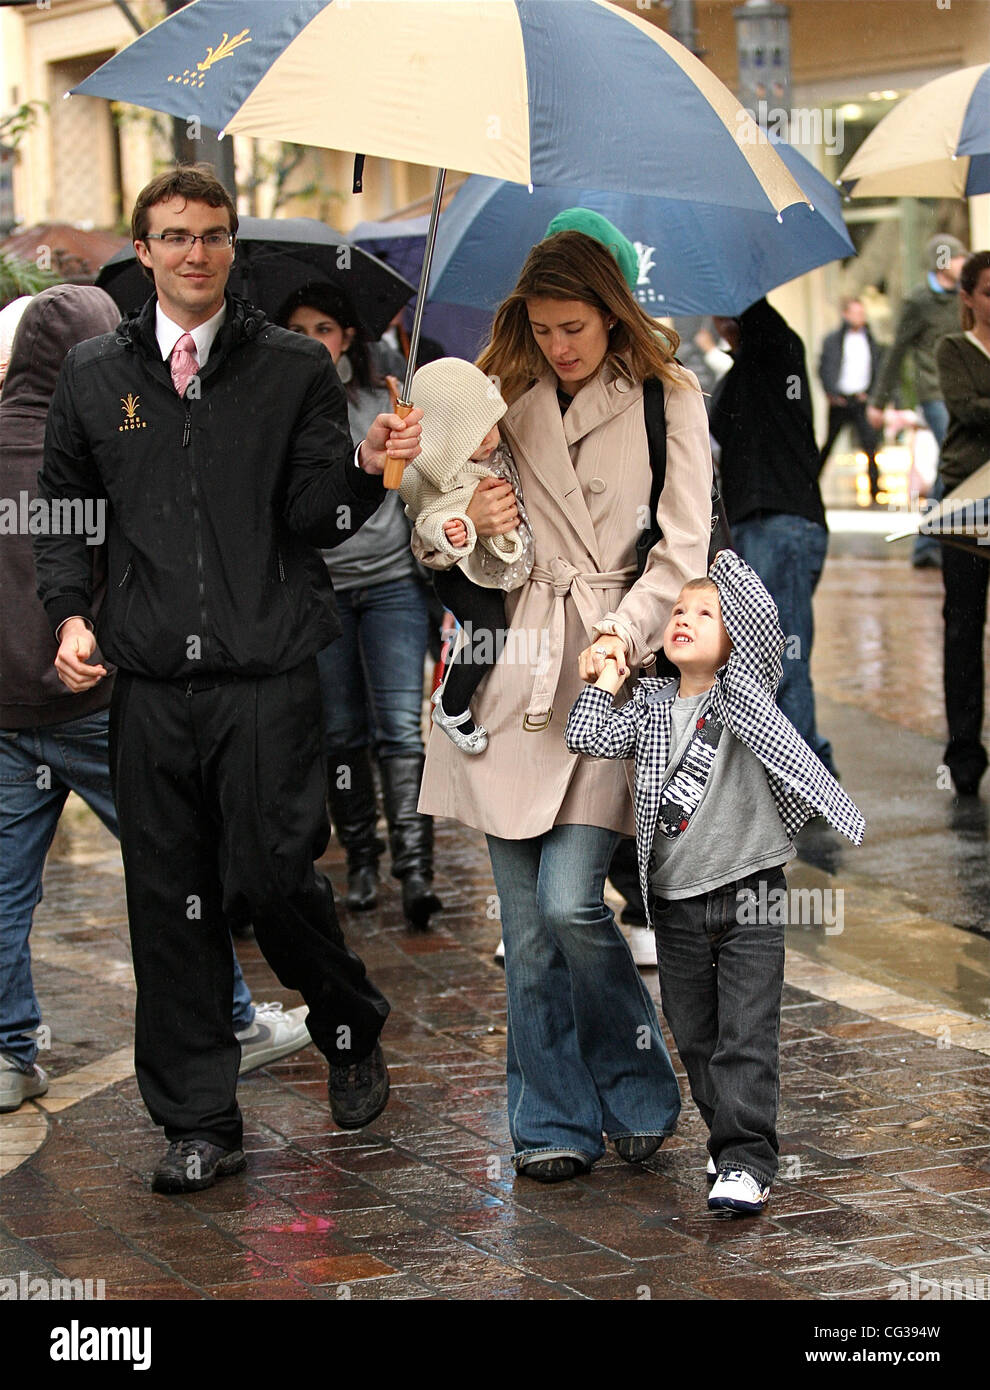 Mark Wahlberg's wife Rhea Durham and her family visit the Santa house on a rainy day during a visit to the Grove Hollywood, California - 22.12.10 Stock Photo